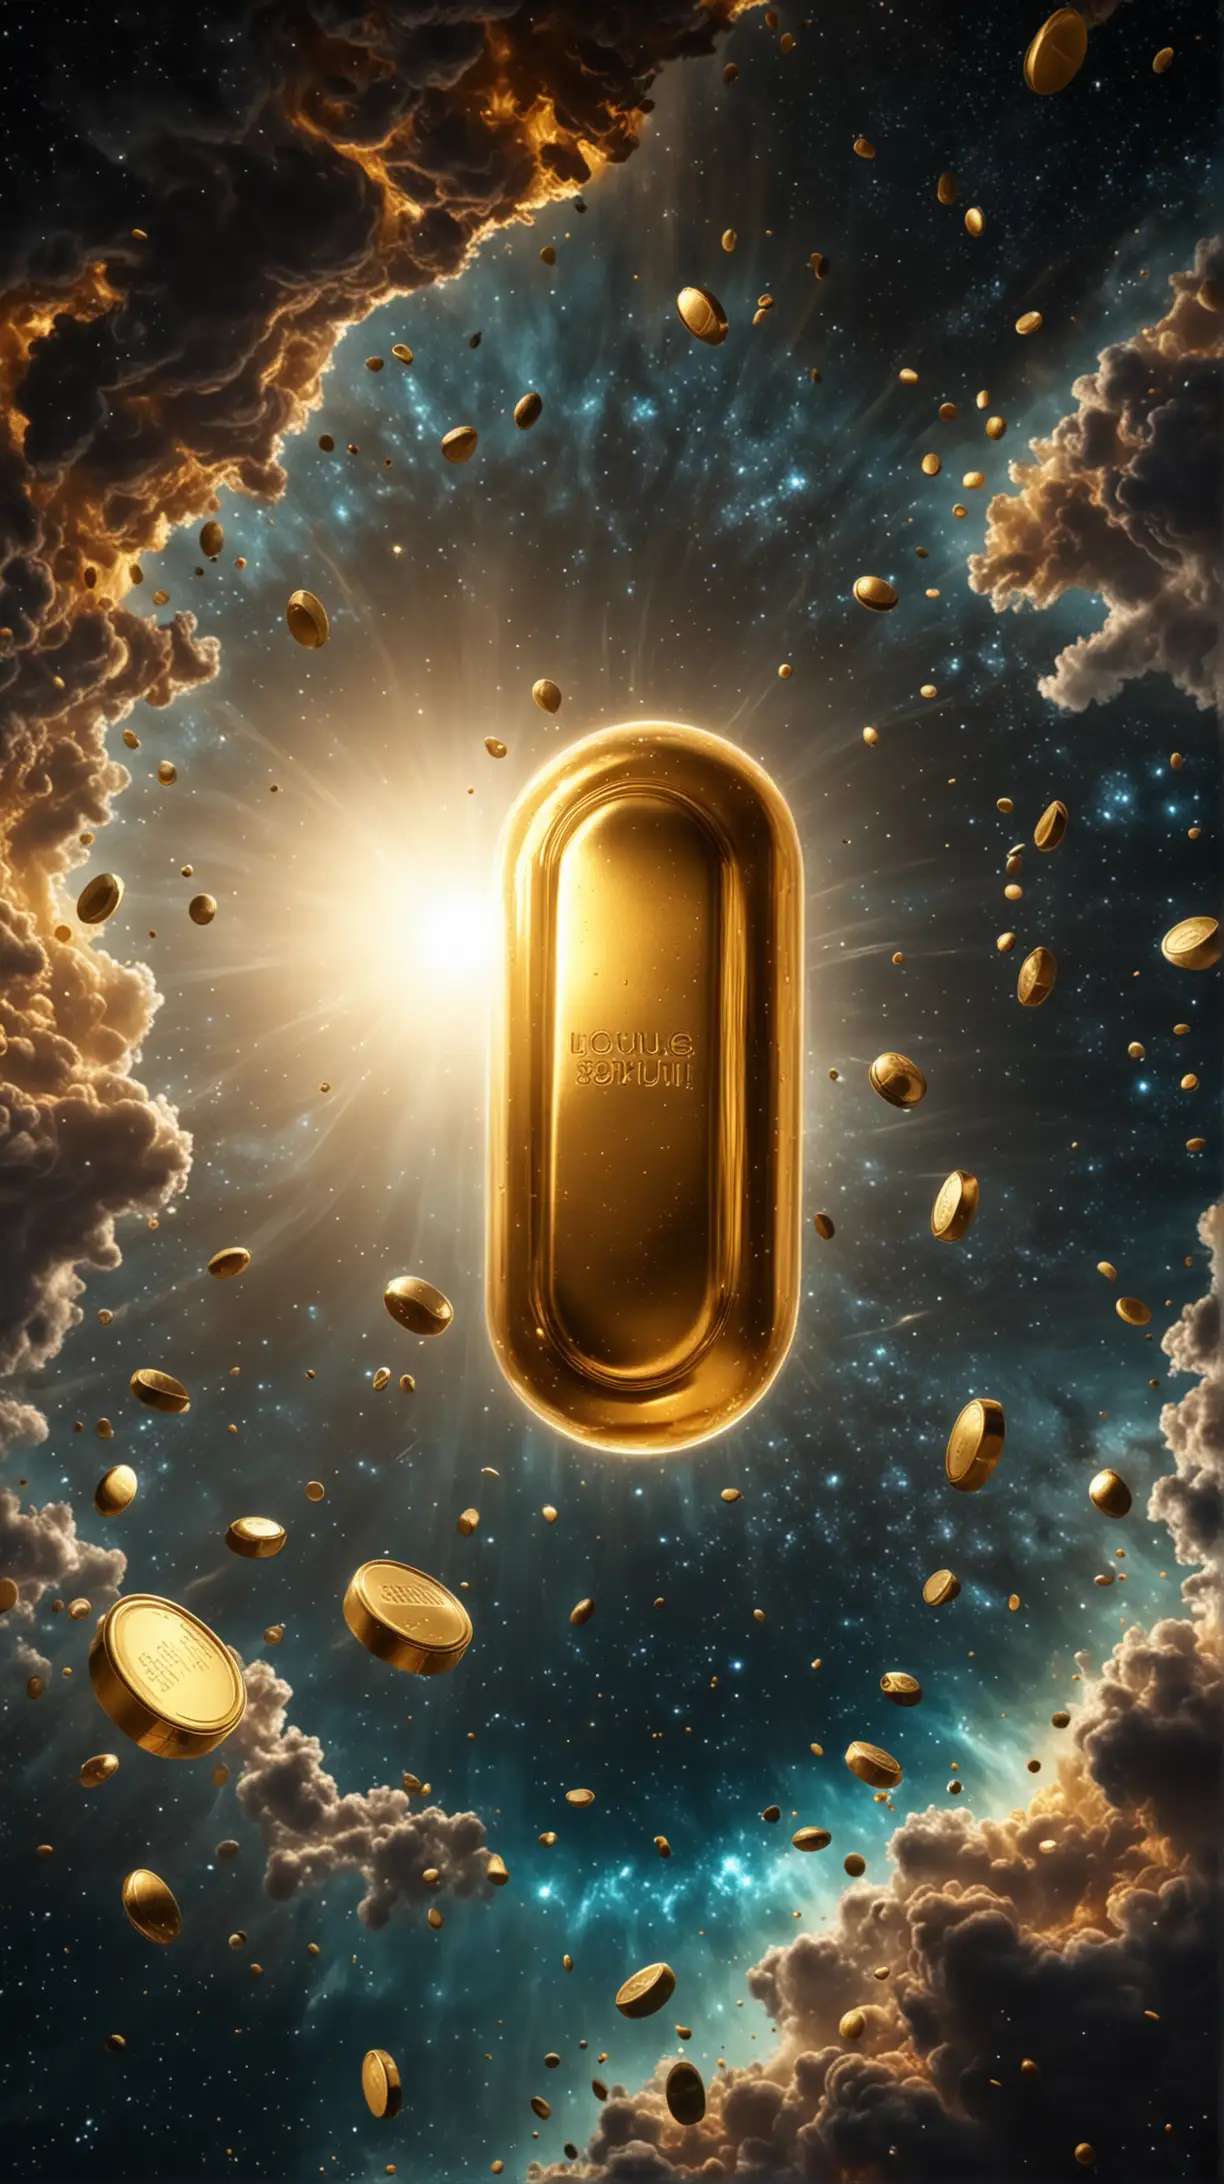 gold supplement pill floating in the center of the universe with epic background, 4k, HDR, hyper-realistic